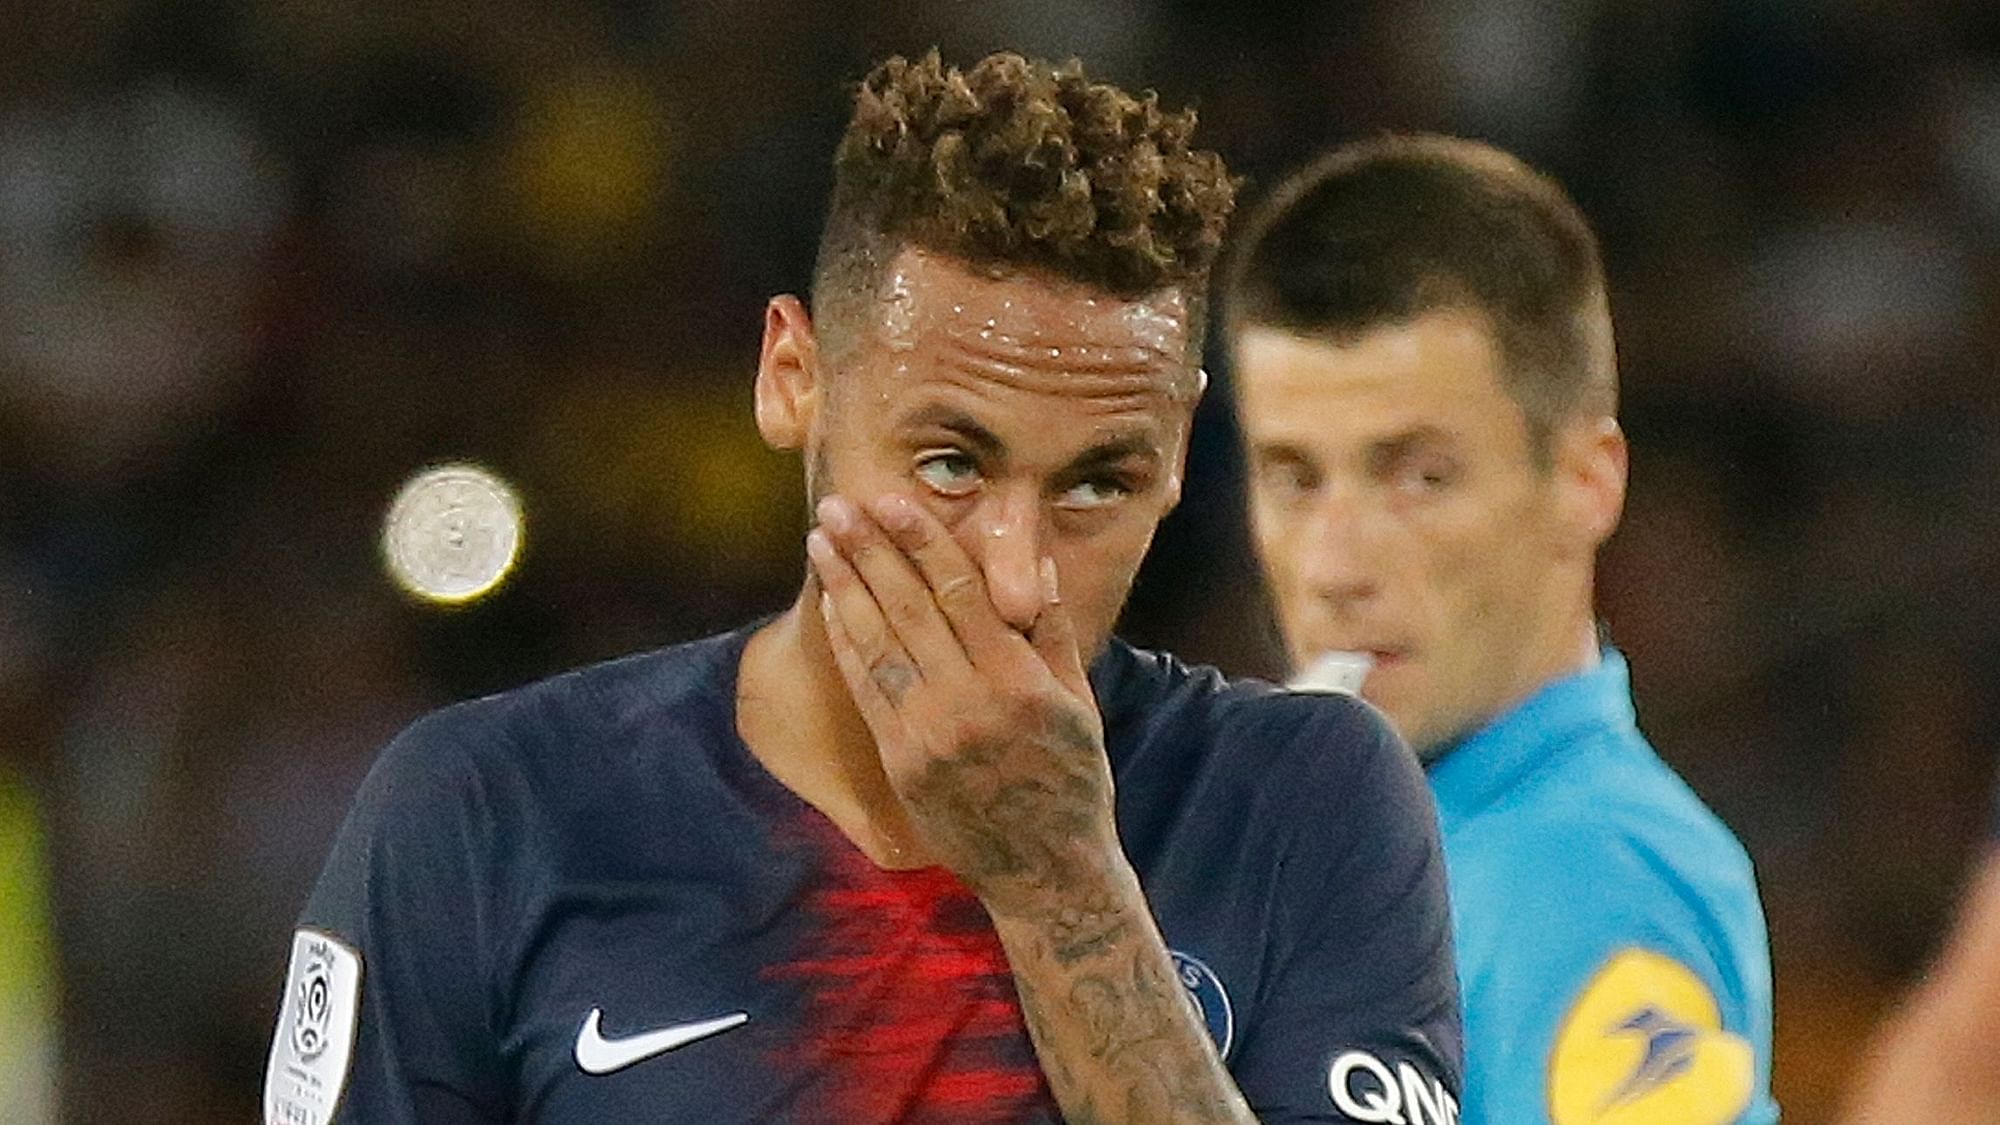 PSG’s Neymar reacts after missing a scoring chance during the French League One soccer match between Paris Saint-Germain and Nice at the Parc des Princes stadium in Paris, France, Saturday, May 4, 2019.&nbsp;